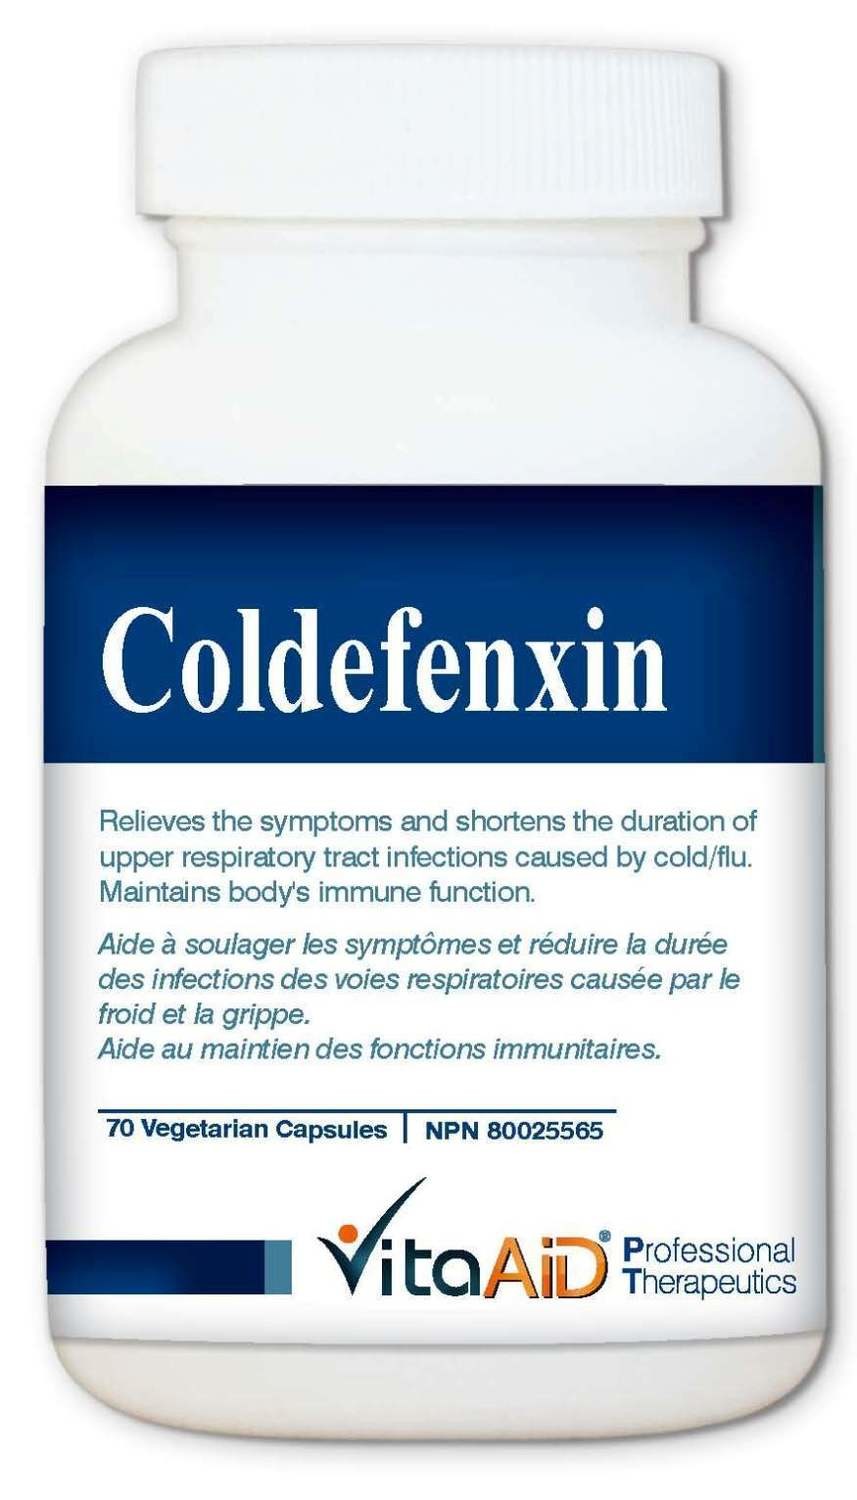 Coldefenxin by Vita Aid